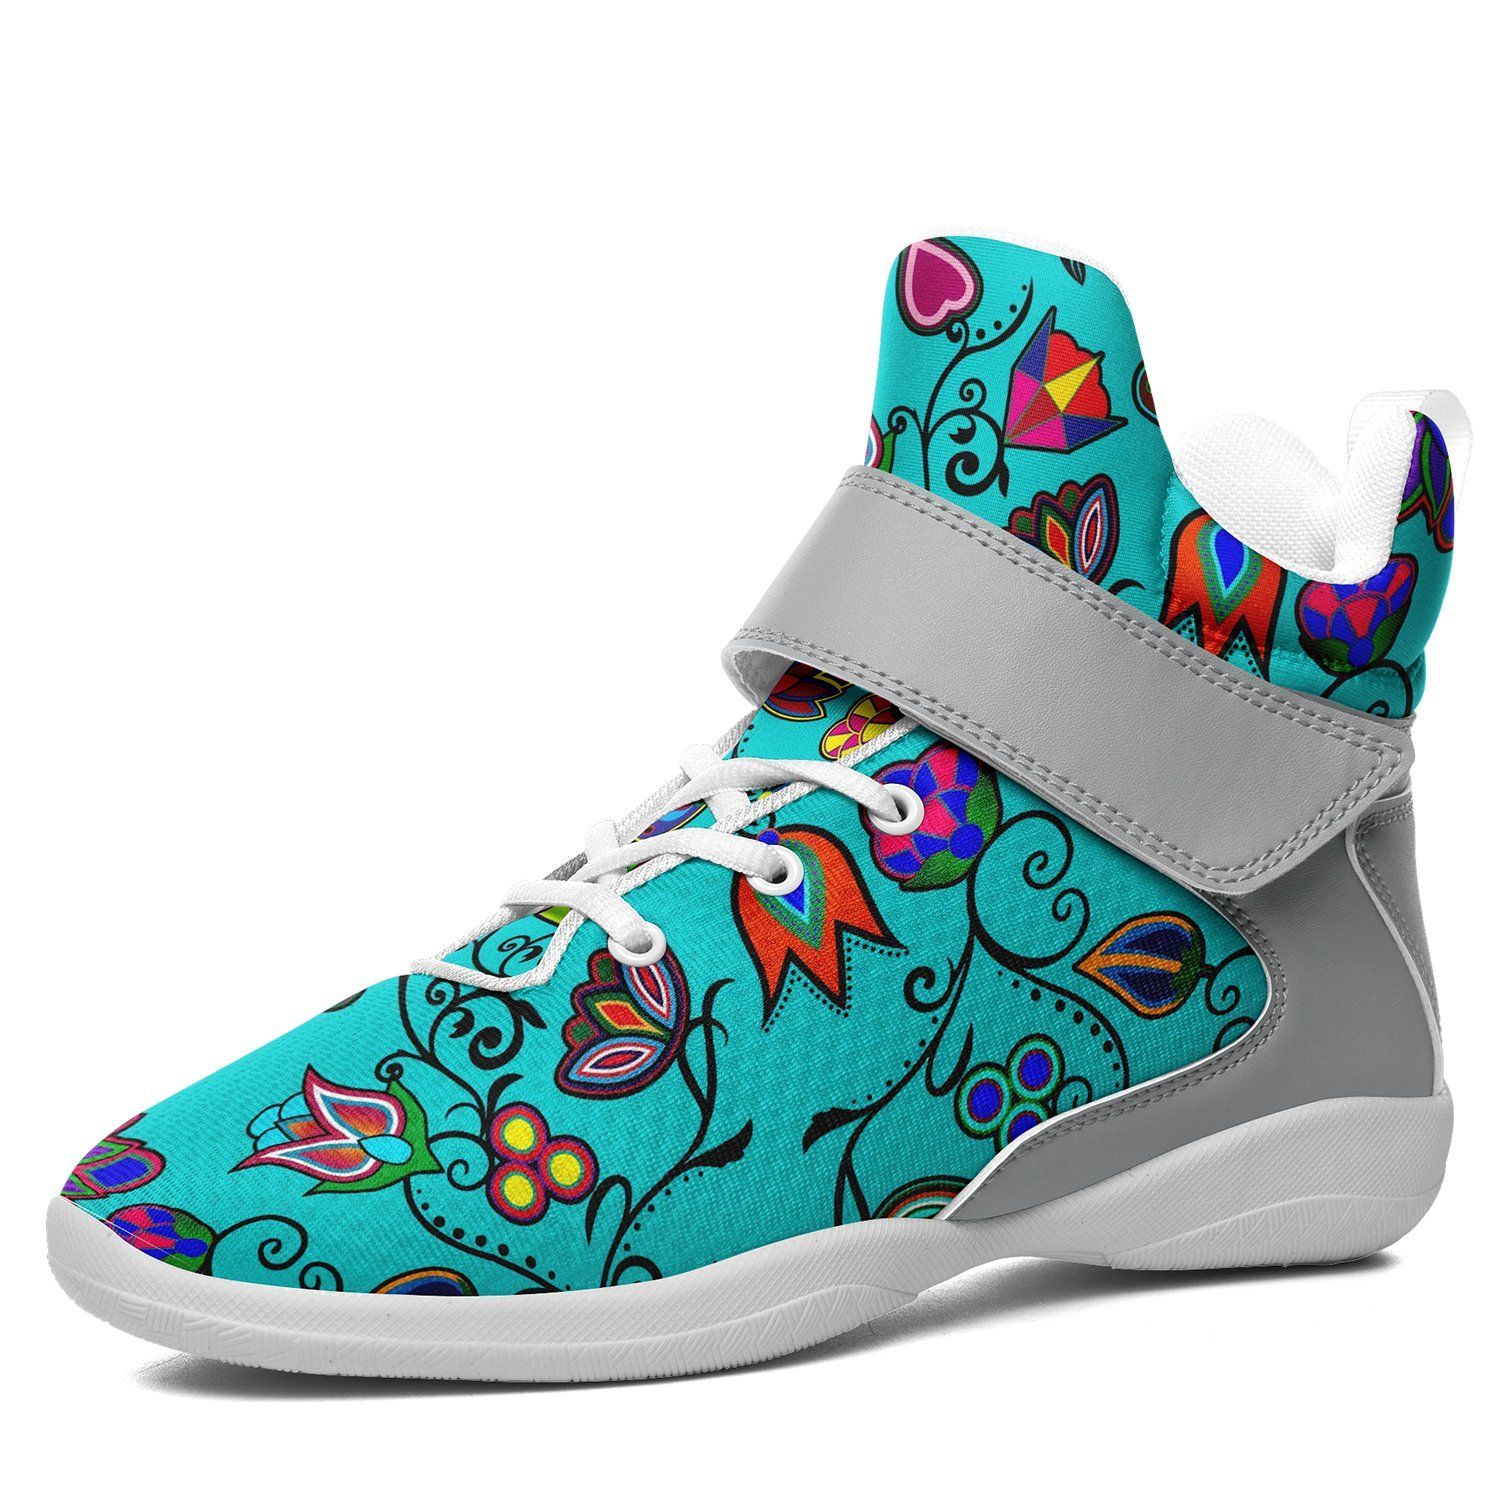 Indigenous Paisley Sky Kid's Ipottaa Basketball / Sport High Top Shoes 49 Dzine US Child 12.5 / EUR 30 White Sole with Gray Strap 